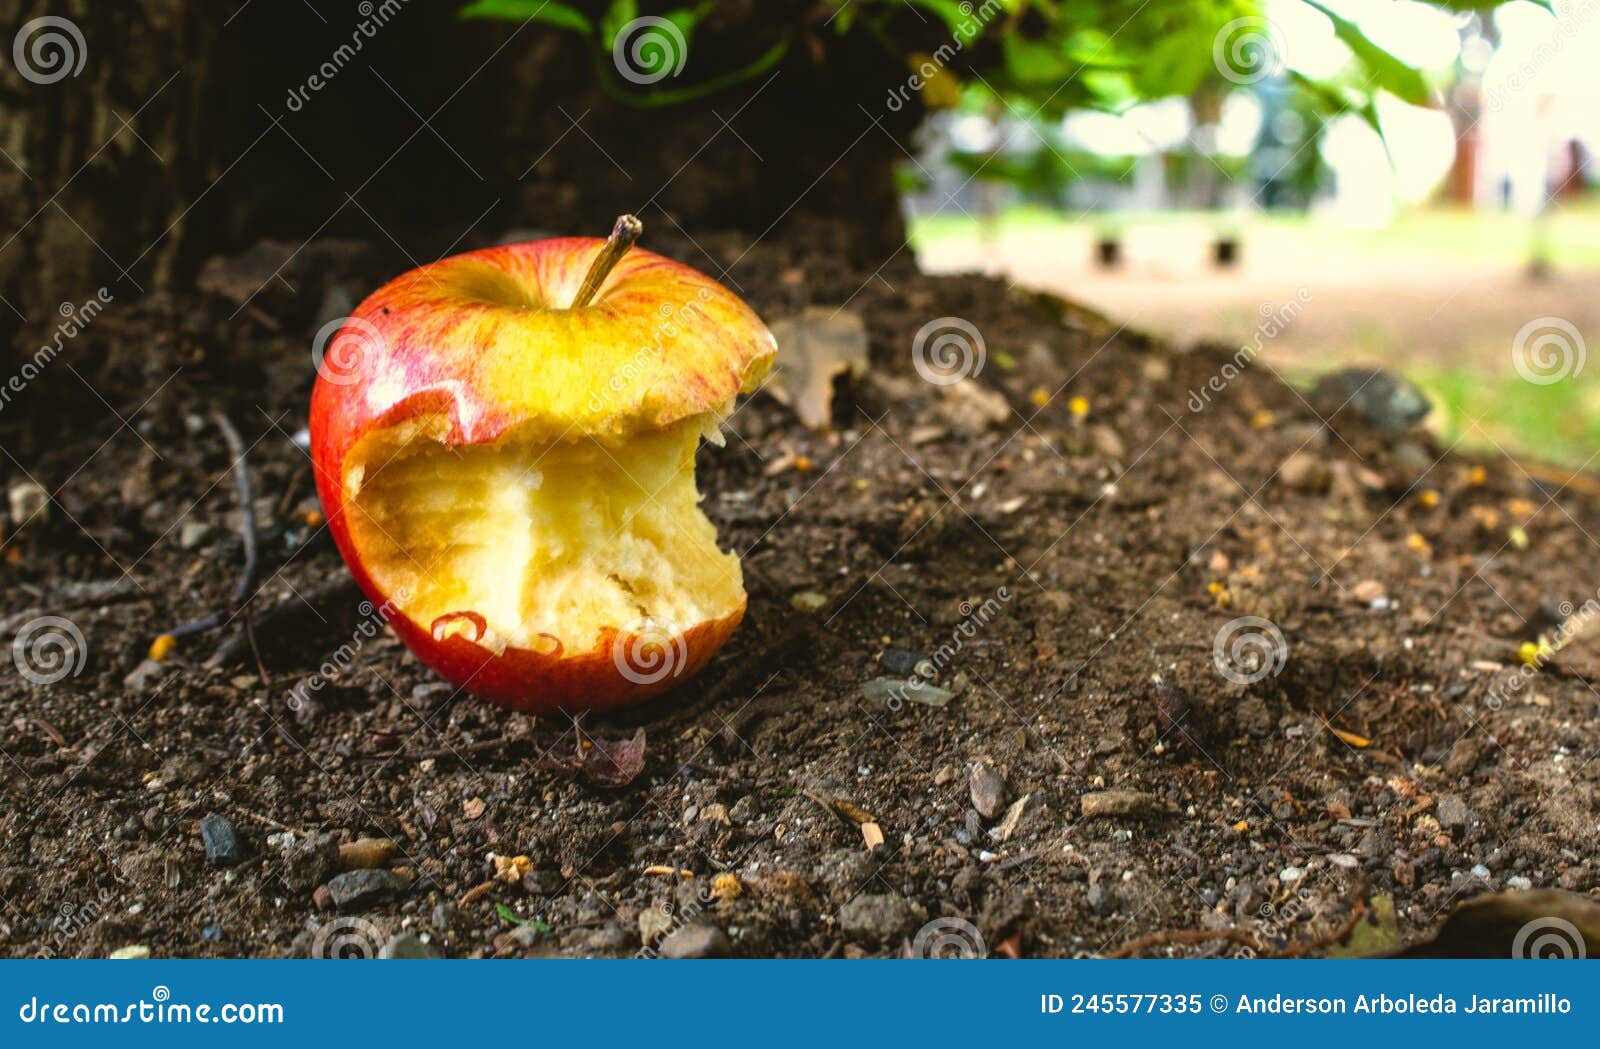 bitten apple lying on the ground with dirt outdoors